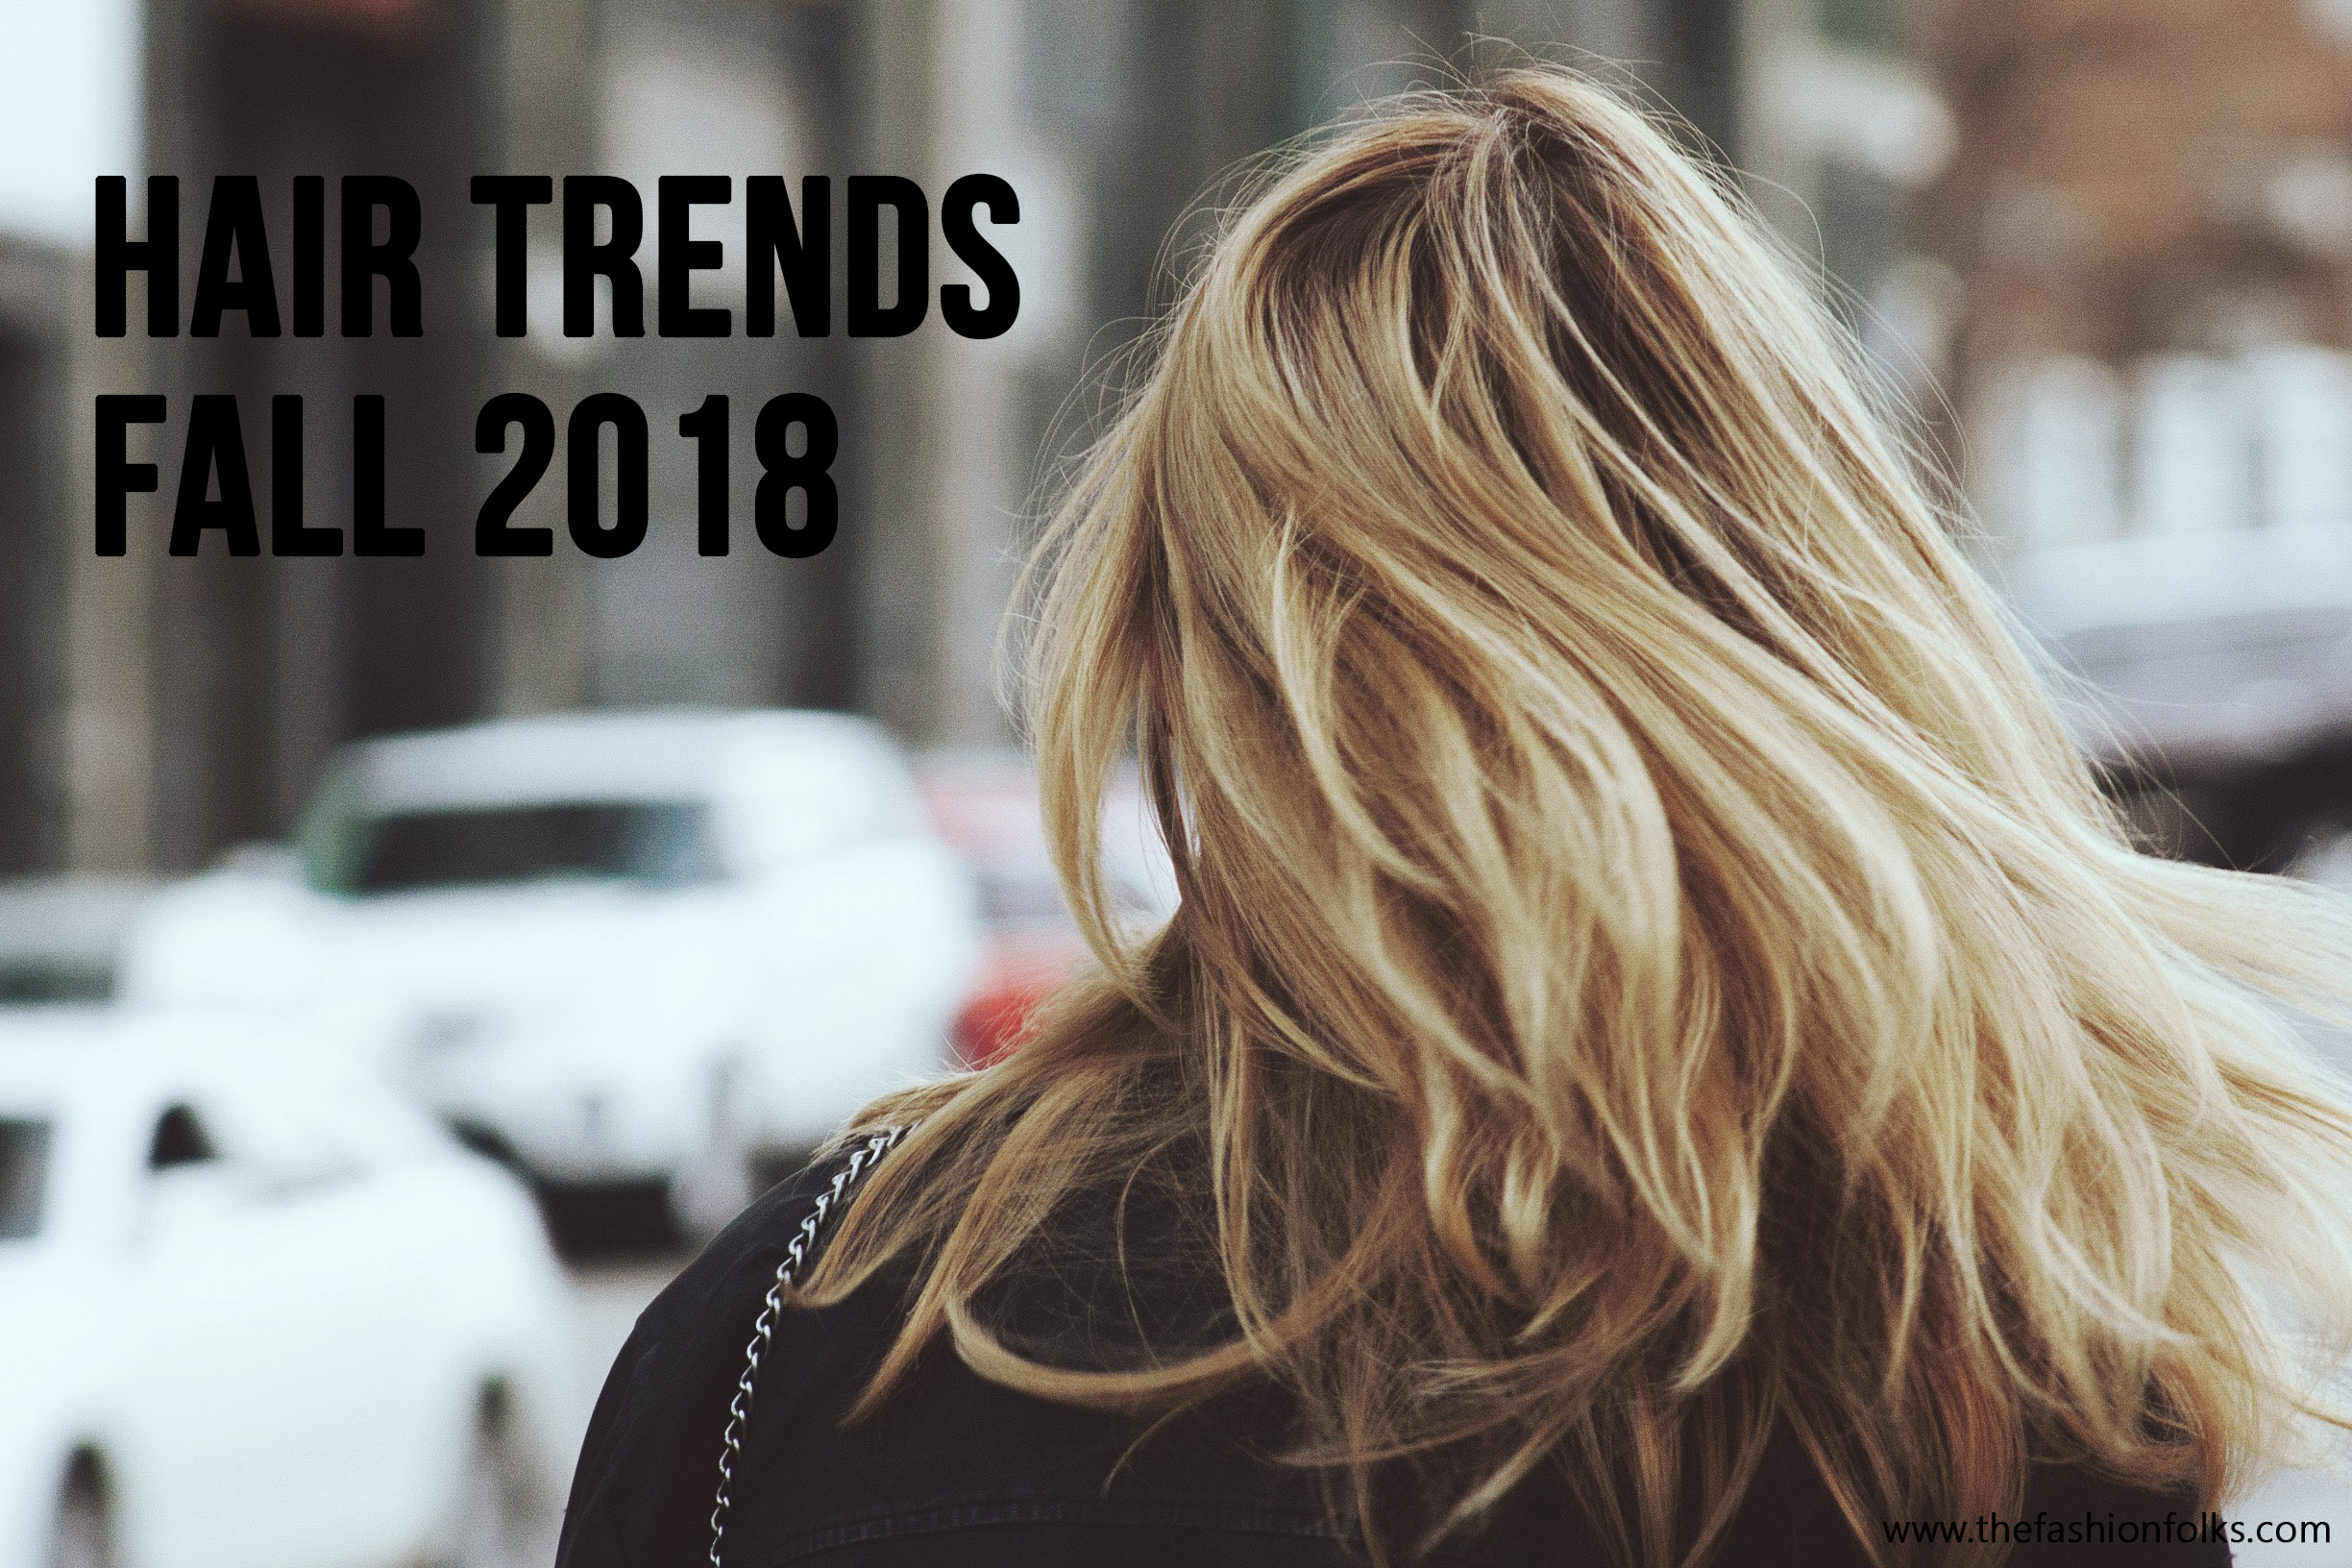 Preview: Hair Trends Fall 2018